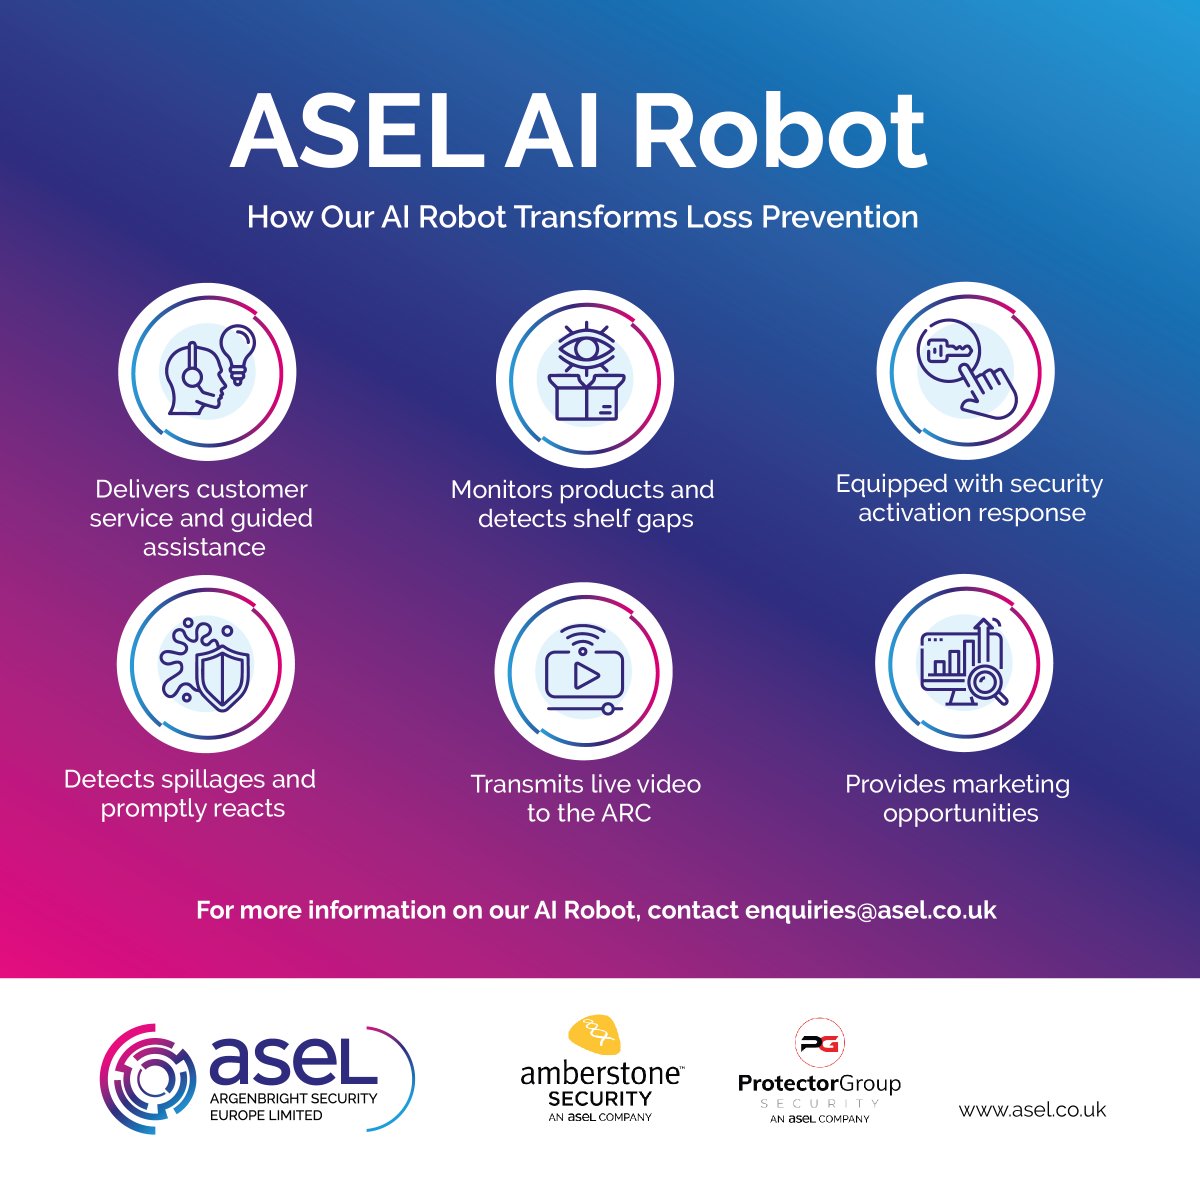 At ASEL, we are committed to transforming the risk and loss prevention industry through advanced technology.  

You will be able to see our AI Robot in action this week at @RetailTechShow, on stands 6J83 & 6J79, so make sure to pay us a visit!

#securitytechnology #RTS2024